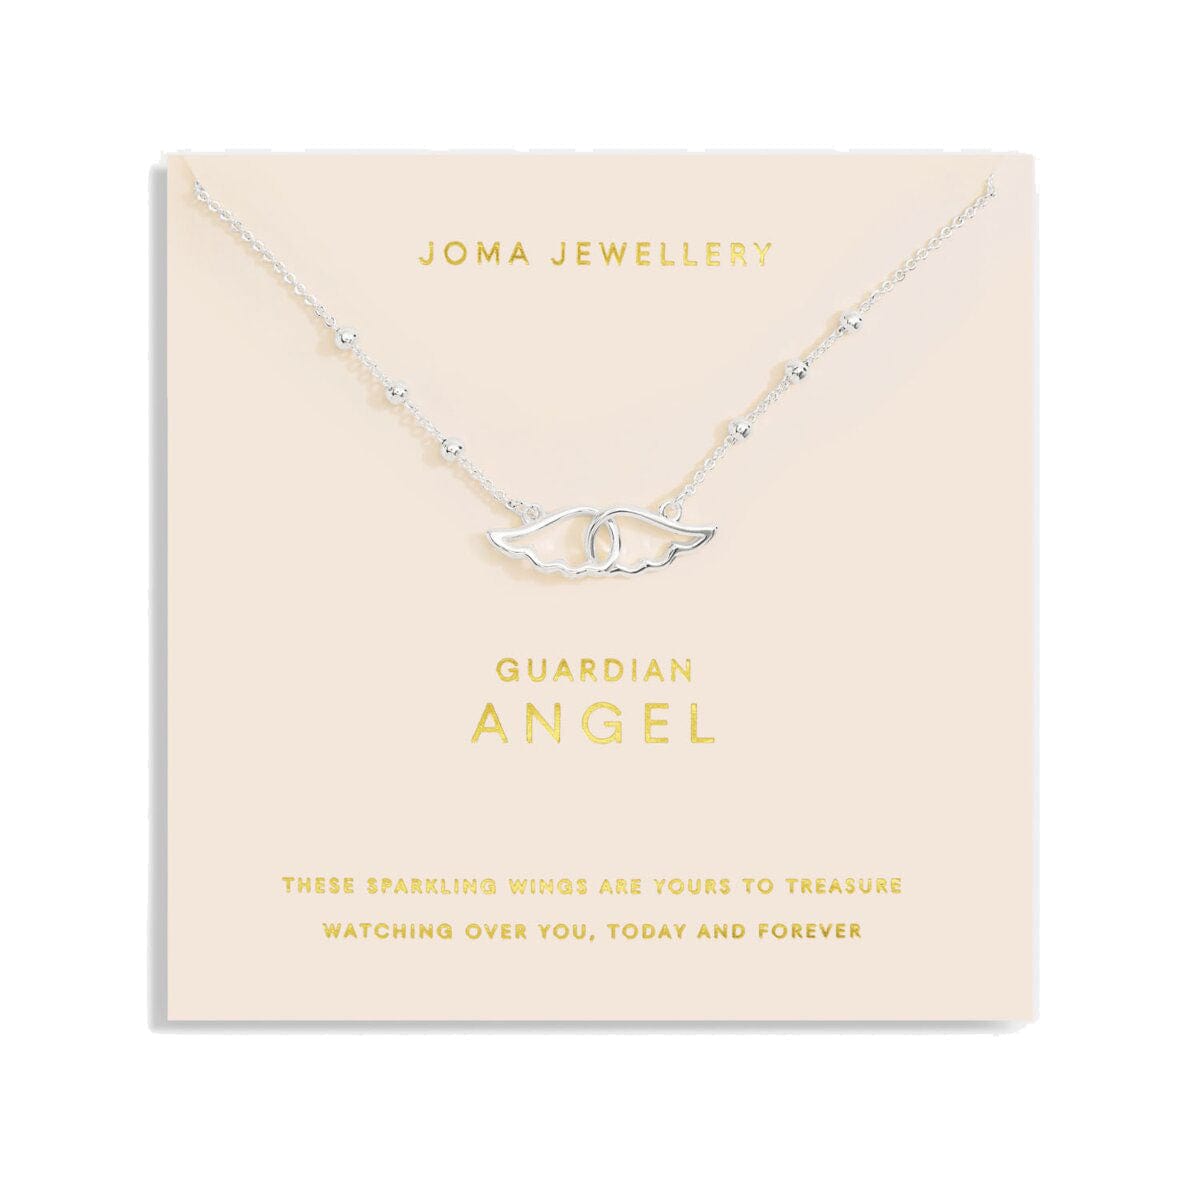 Joma Jewellery Necklace Joma Jewellery Forever Yours Necklace - Guardian Angel